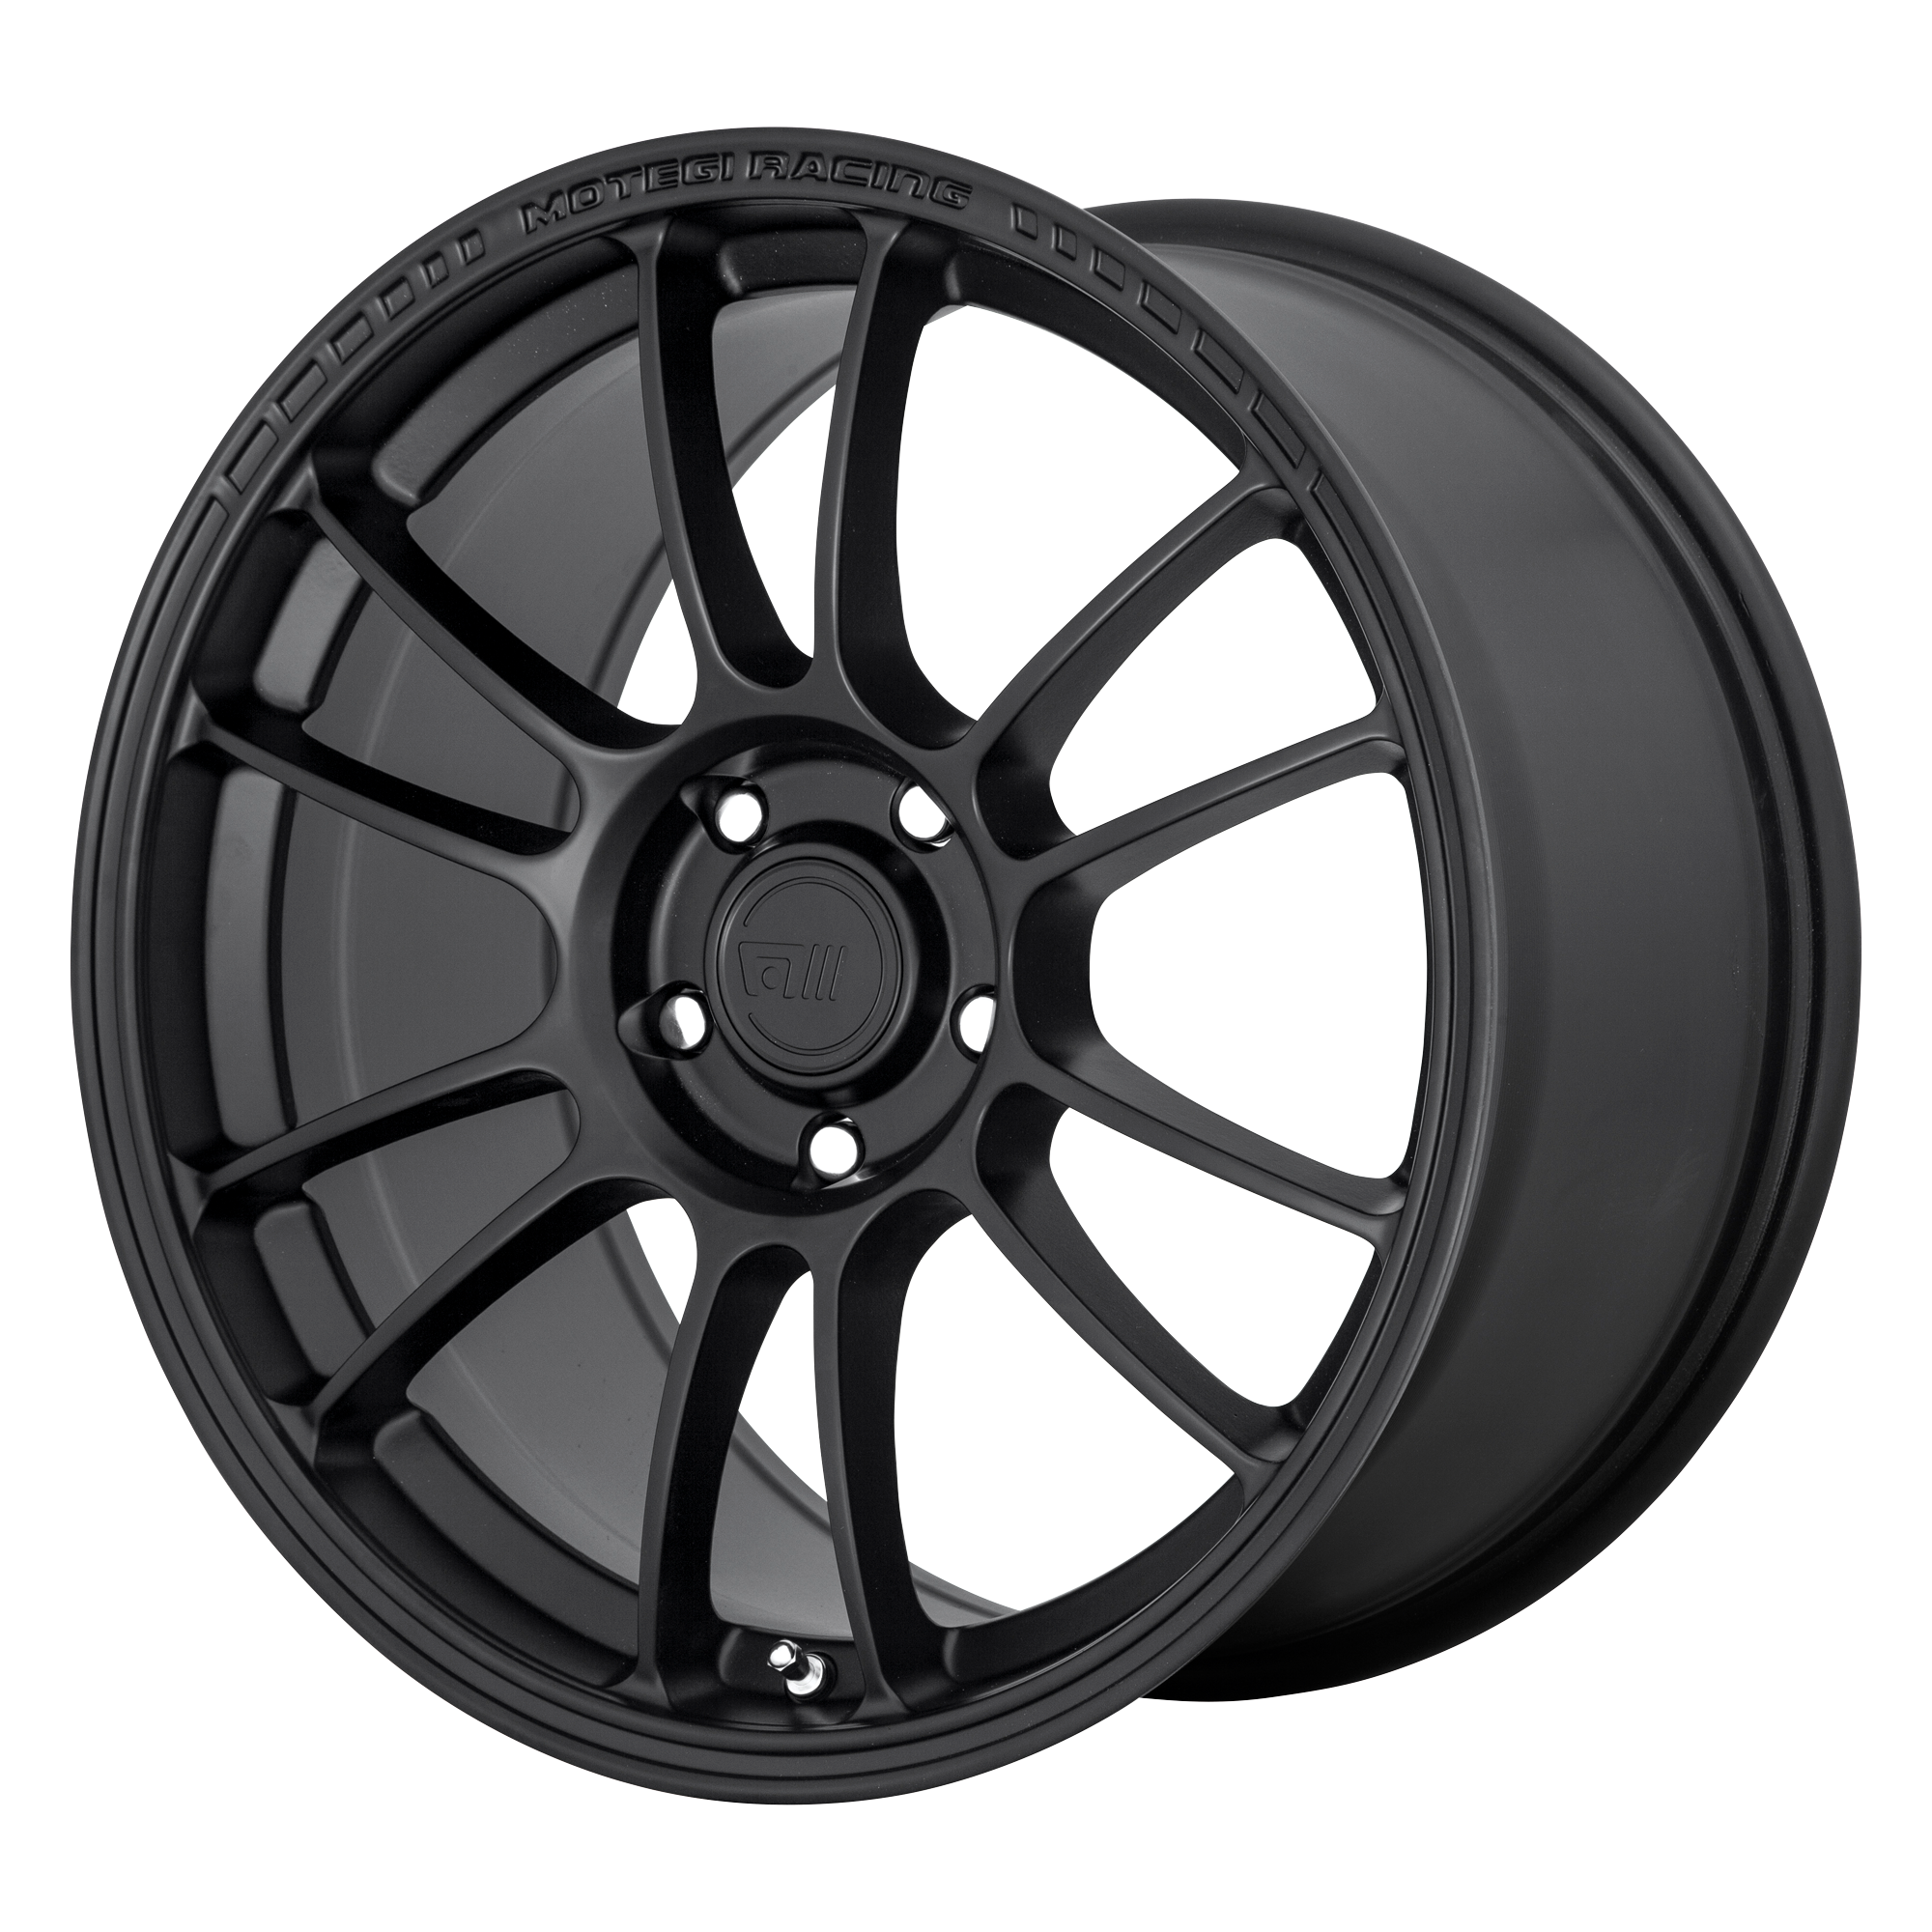 SS6 18x9.5 5x114.30 SATIN BLACK (35 mm) - Tires and Engine Performance